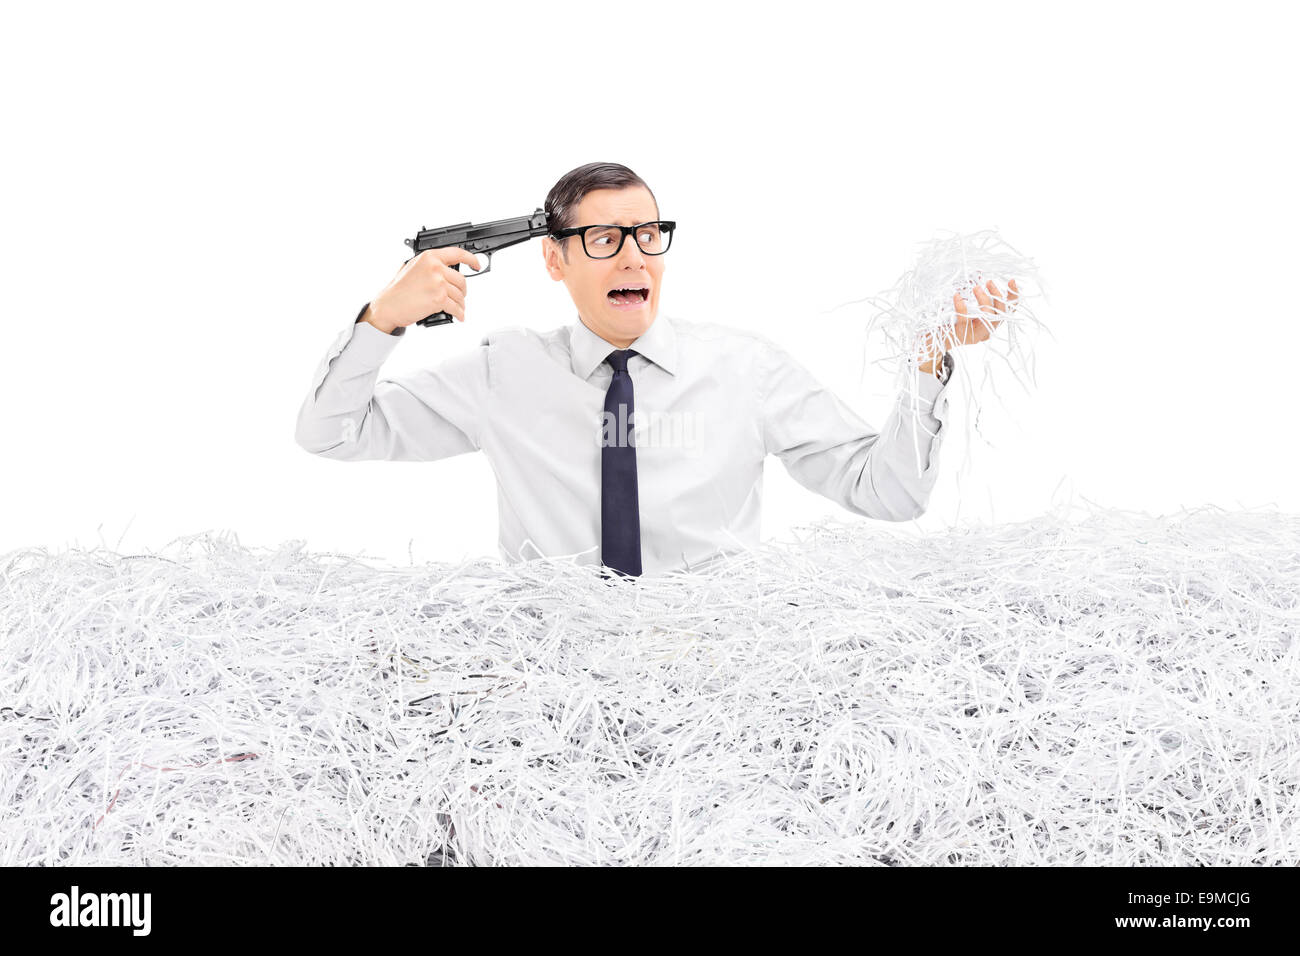 Desperate man holding a gun to his head and standing in a pile of shredded paper isolated on white background Stock Photo